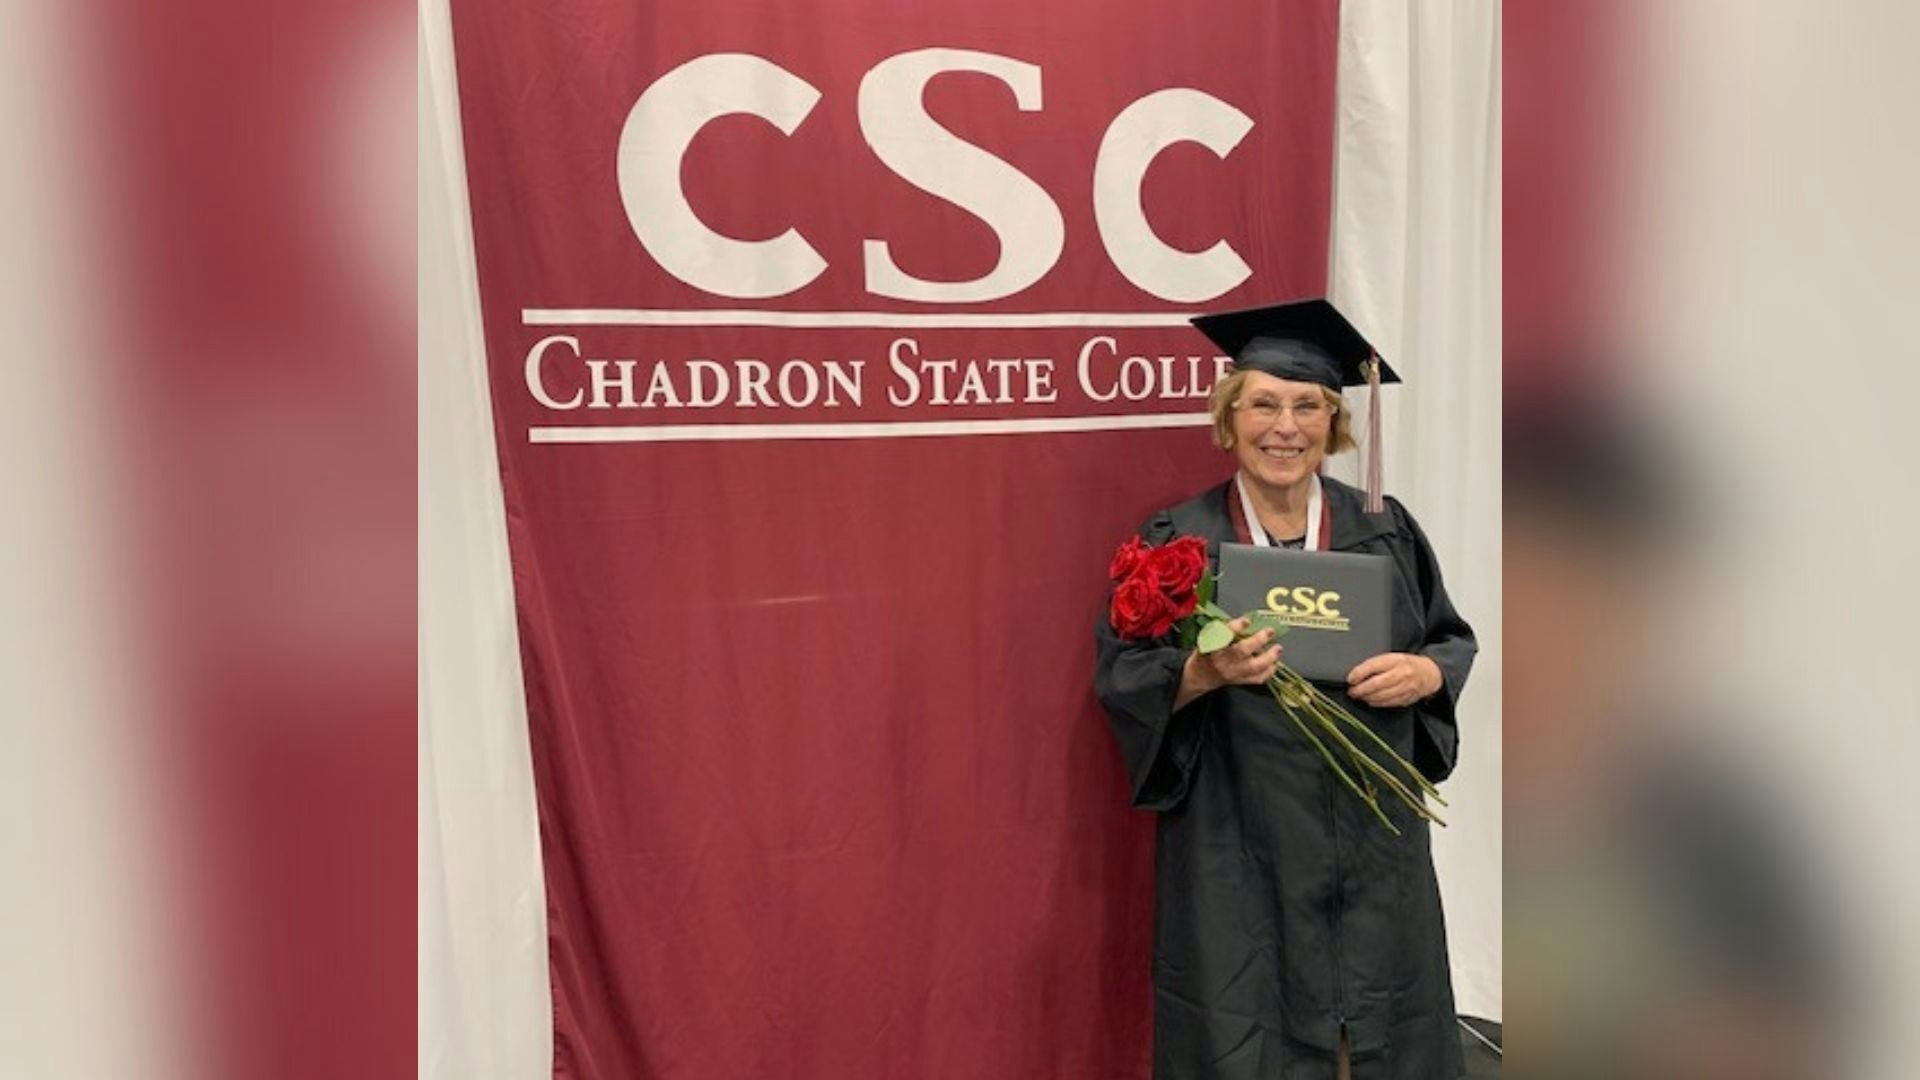 Doris "Mickey" Douglas after receiving her bachelor's degree from Chadron State College on May 6.